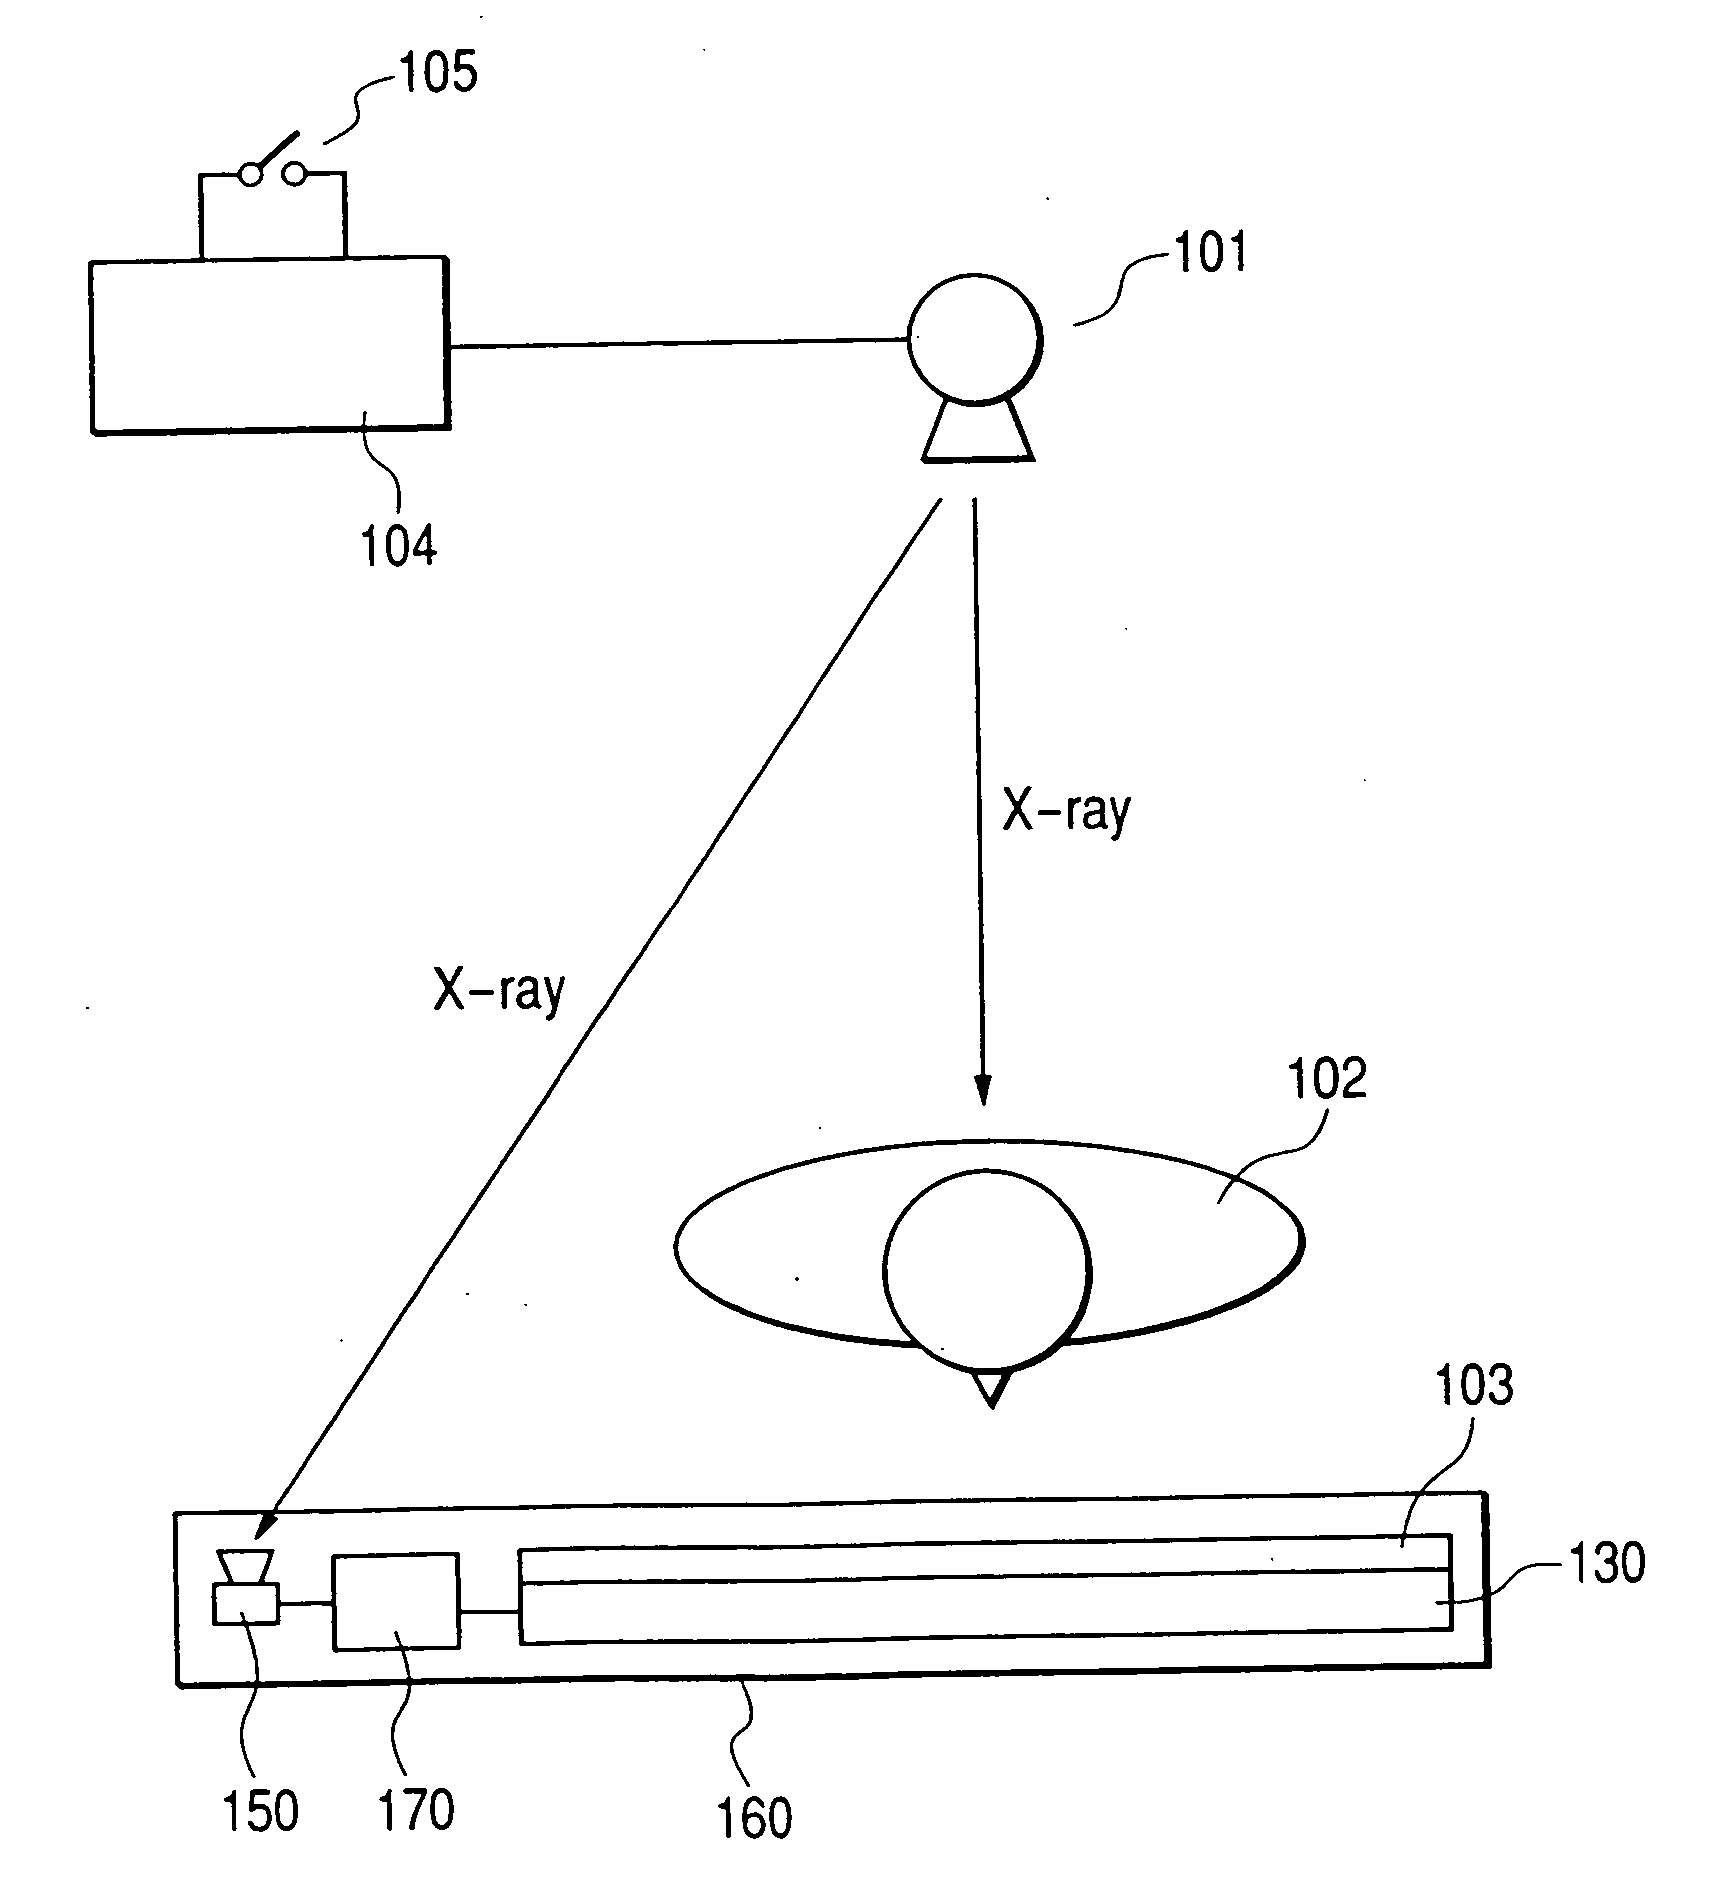 Radiation image pick-up apparatus and system